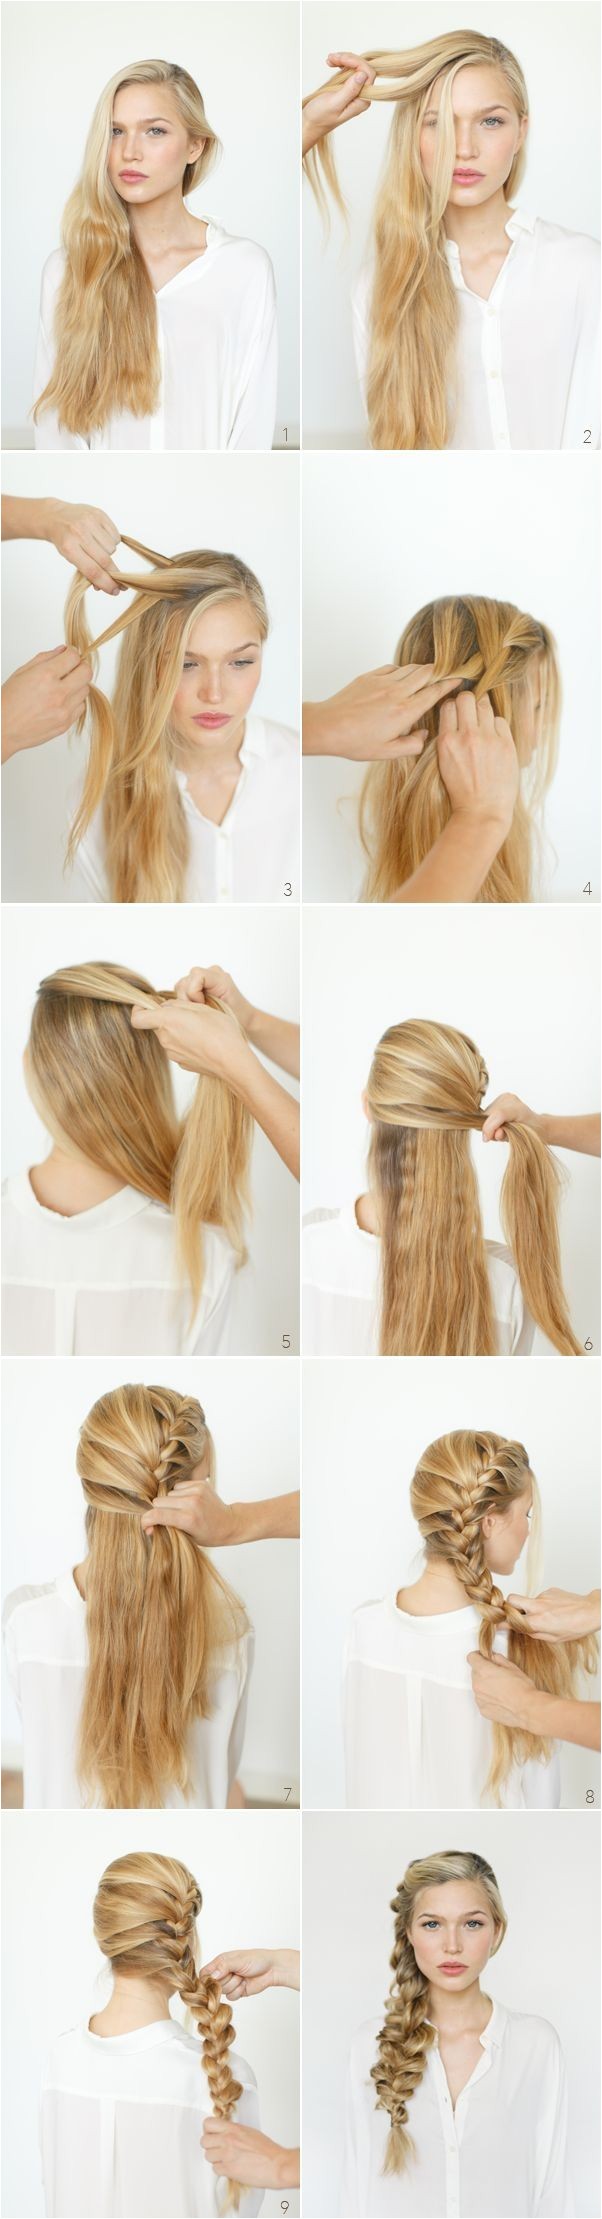 Hairstyles for Long Hair Braids Steps Step by Step Hairstyles for Long Hair Long Hairstyles